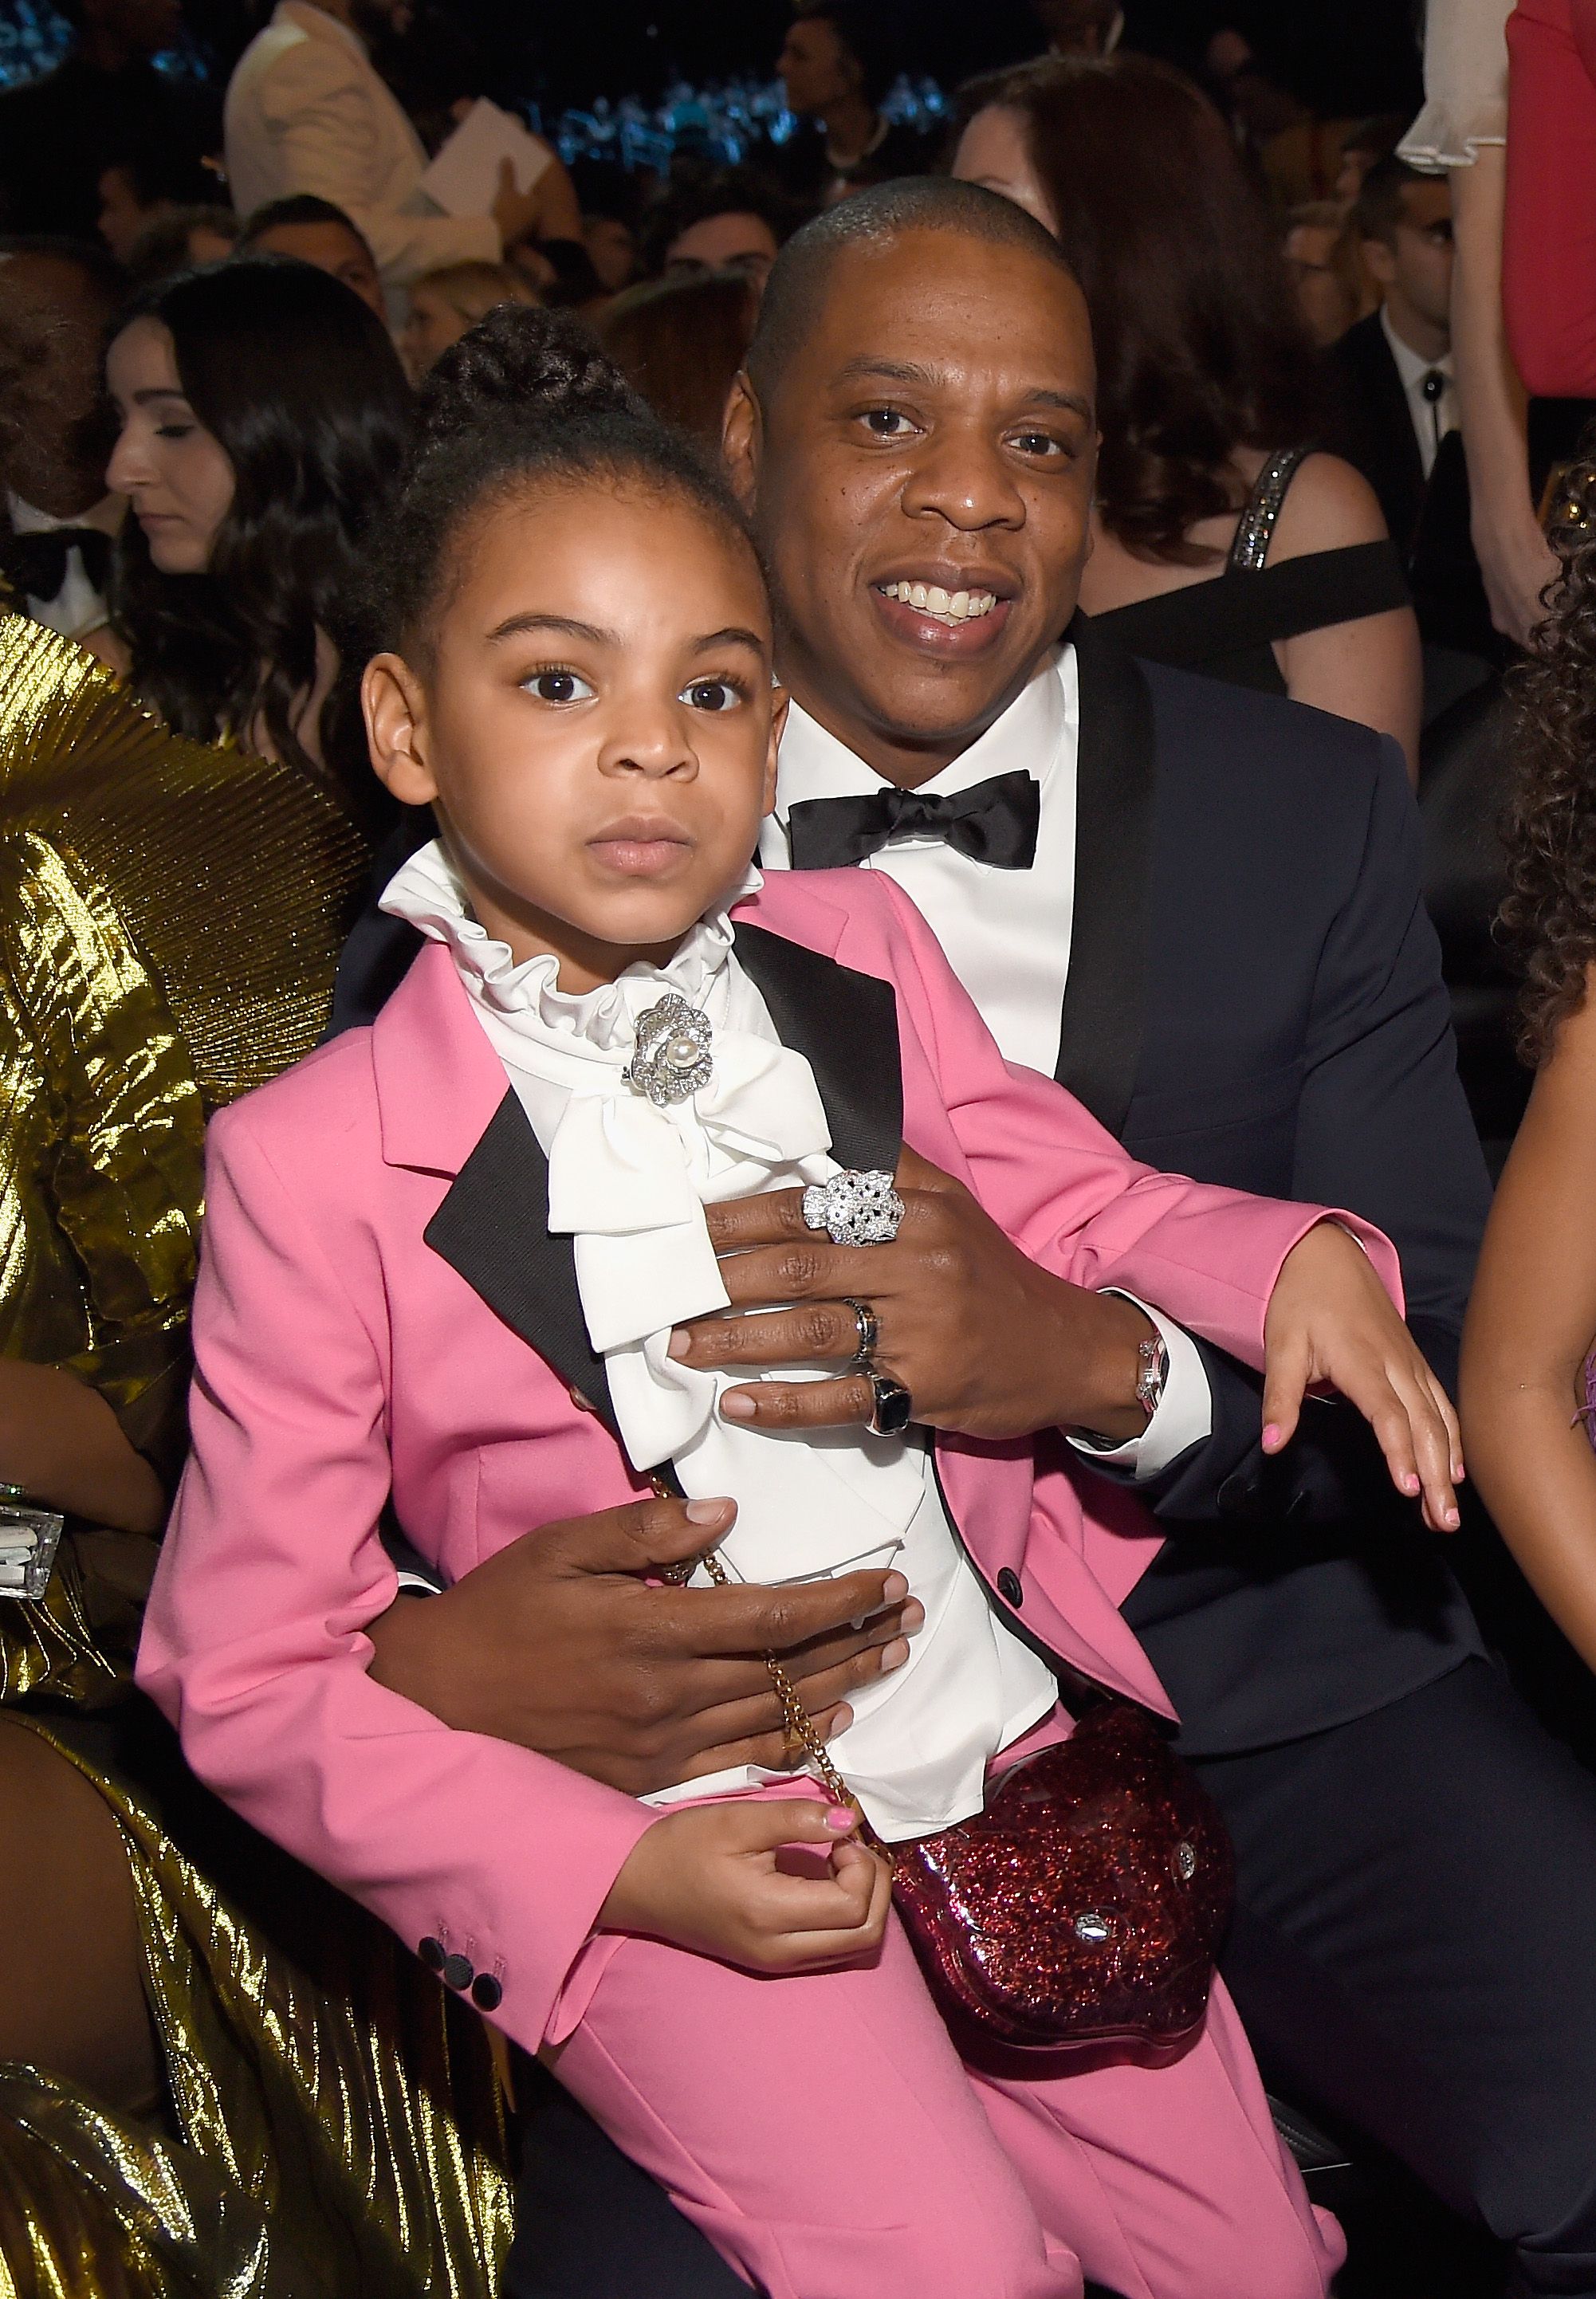 19 Celebrity Kids Who Look Just Like Their Famous Parents